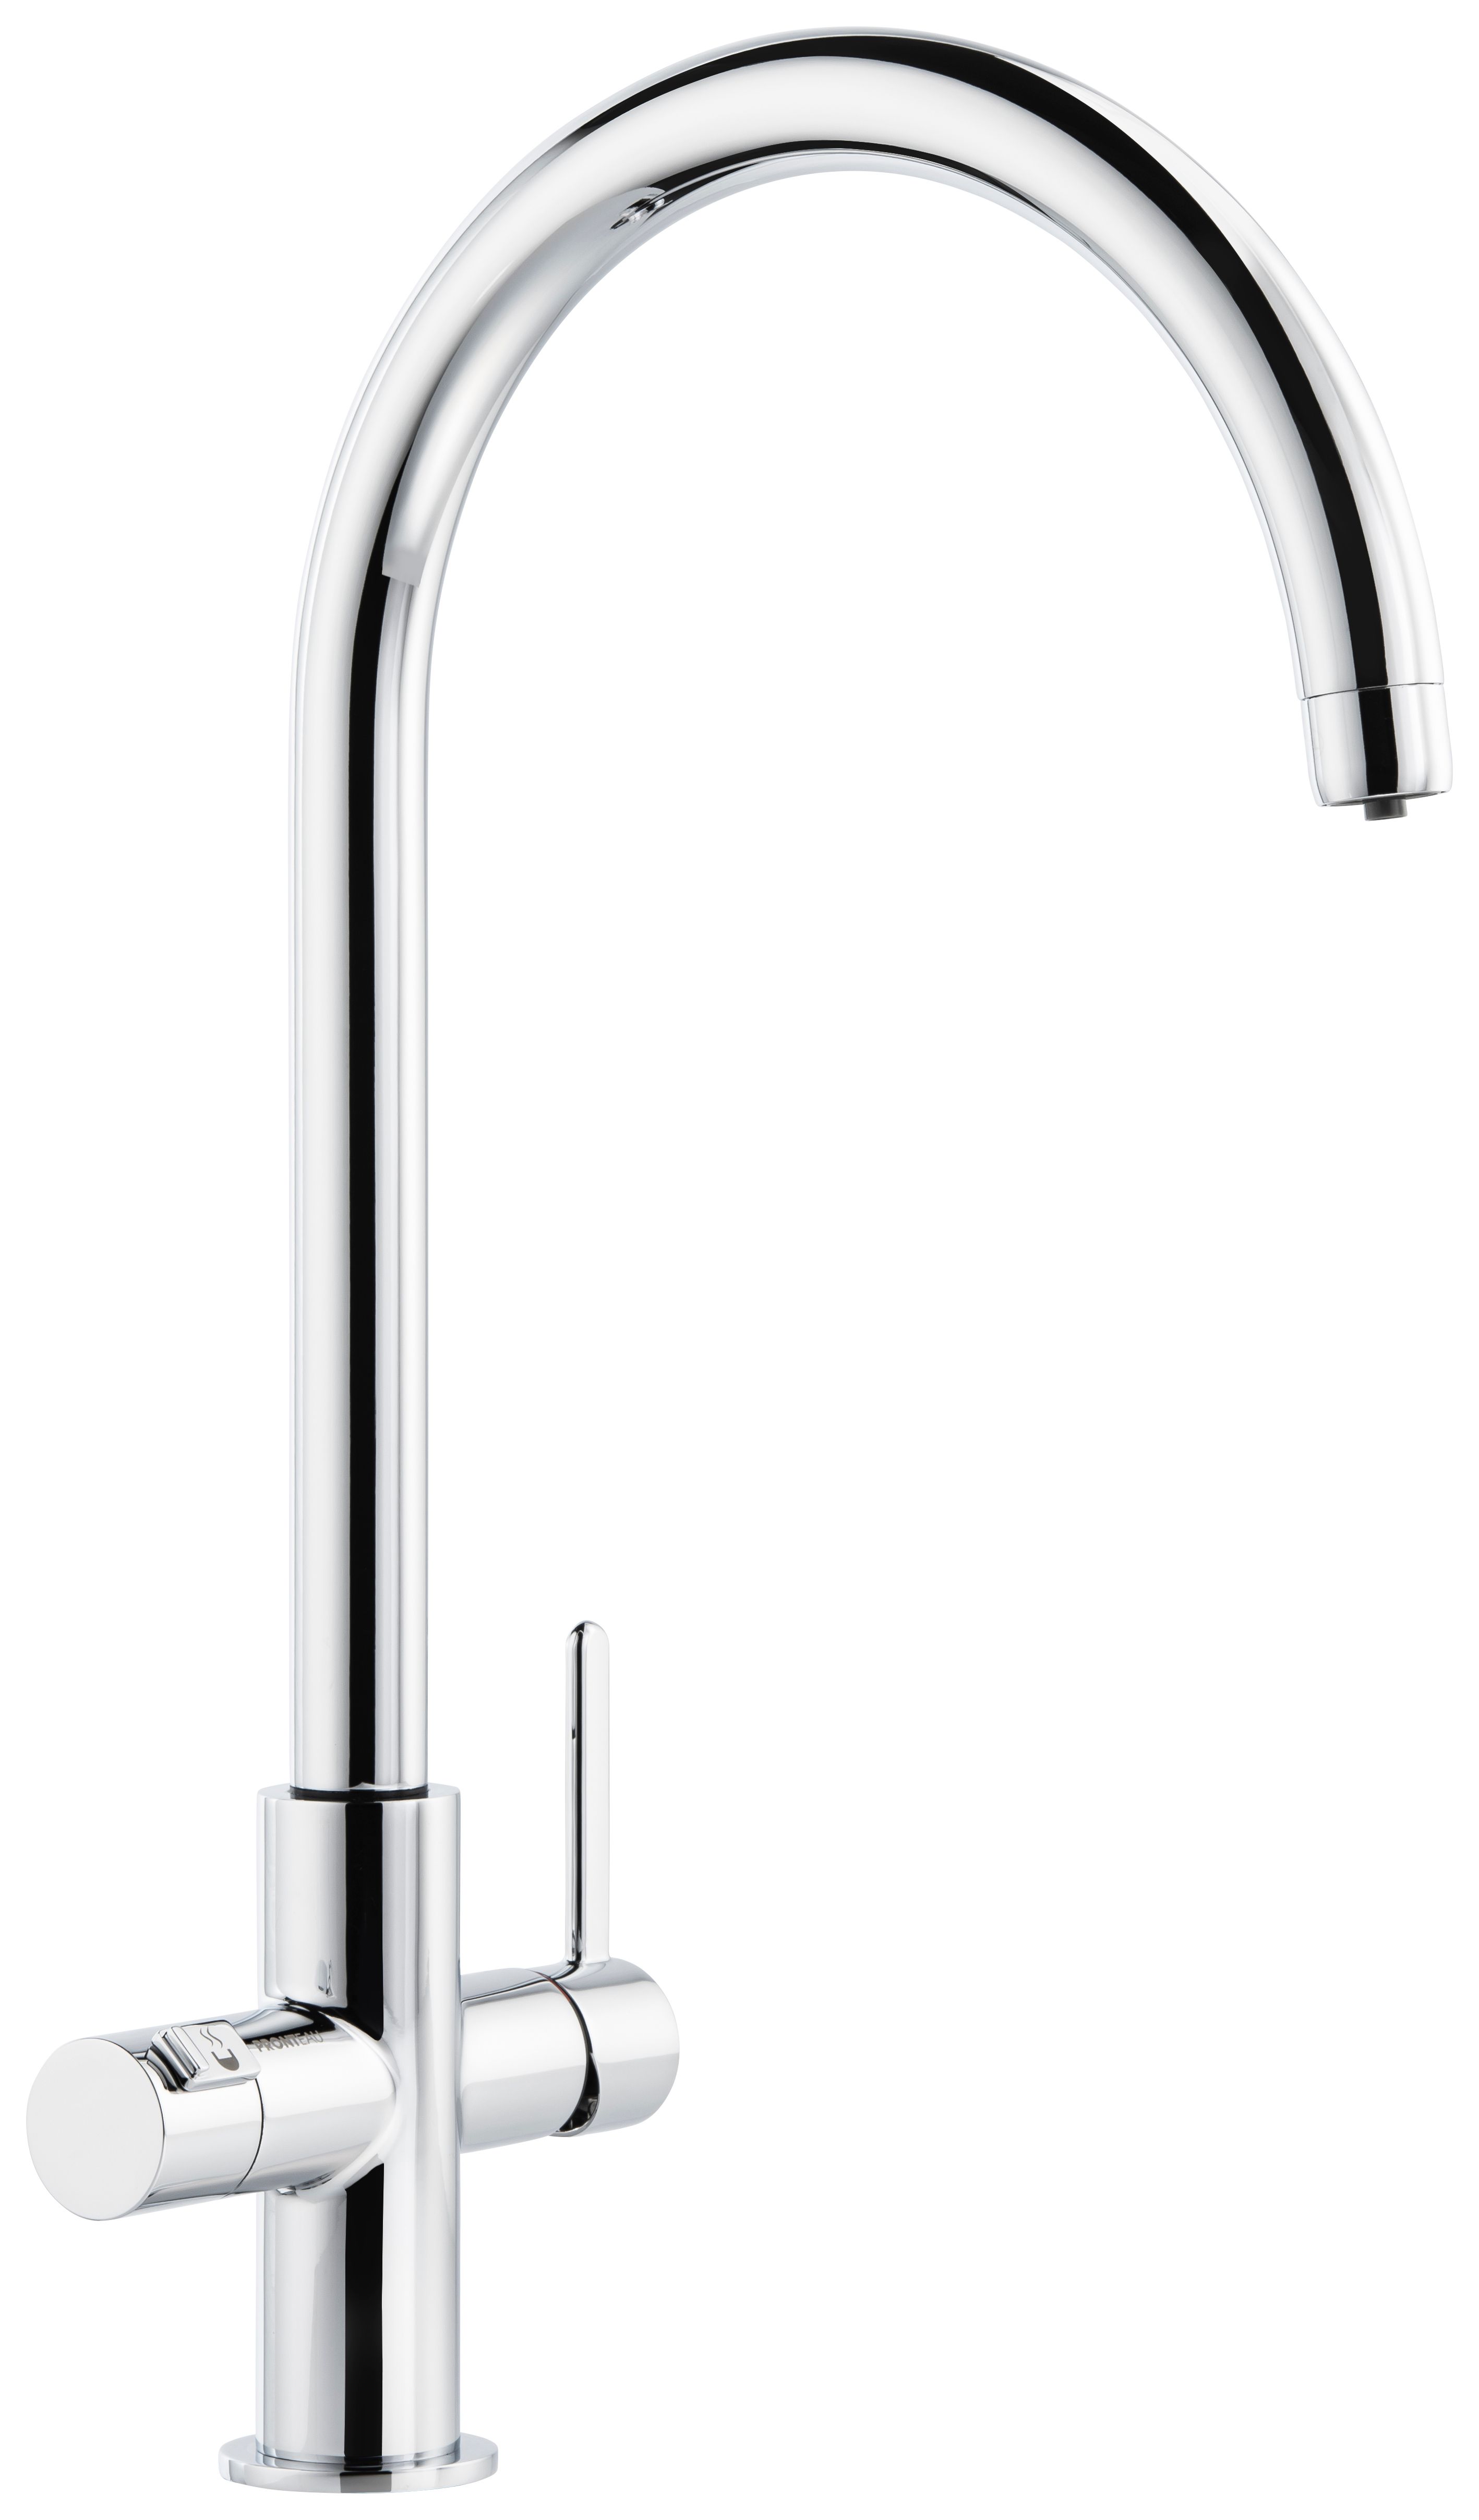 Abode Prothia 3 in 1 Hot Water Kitchen Tap - Chrome